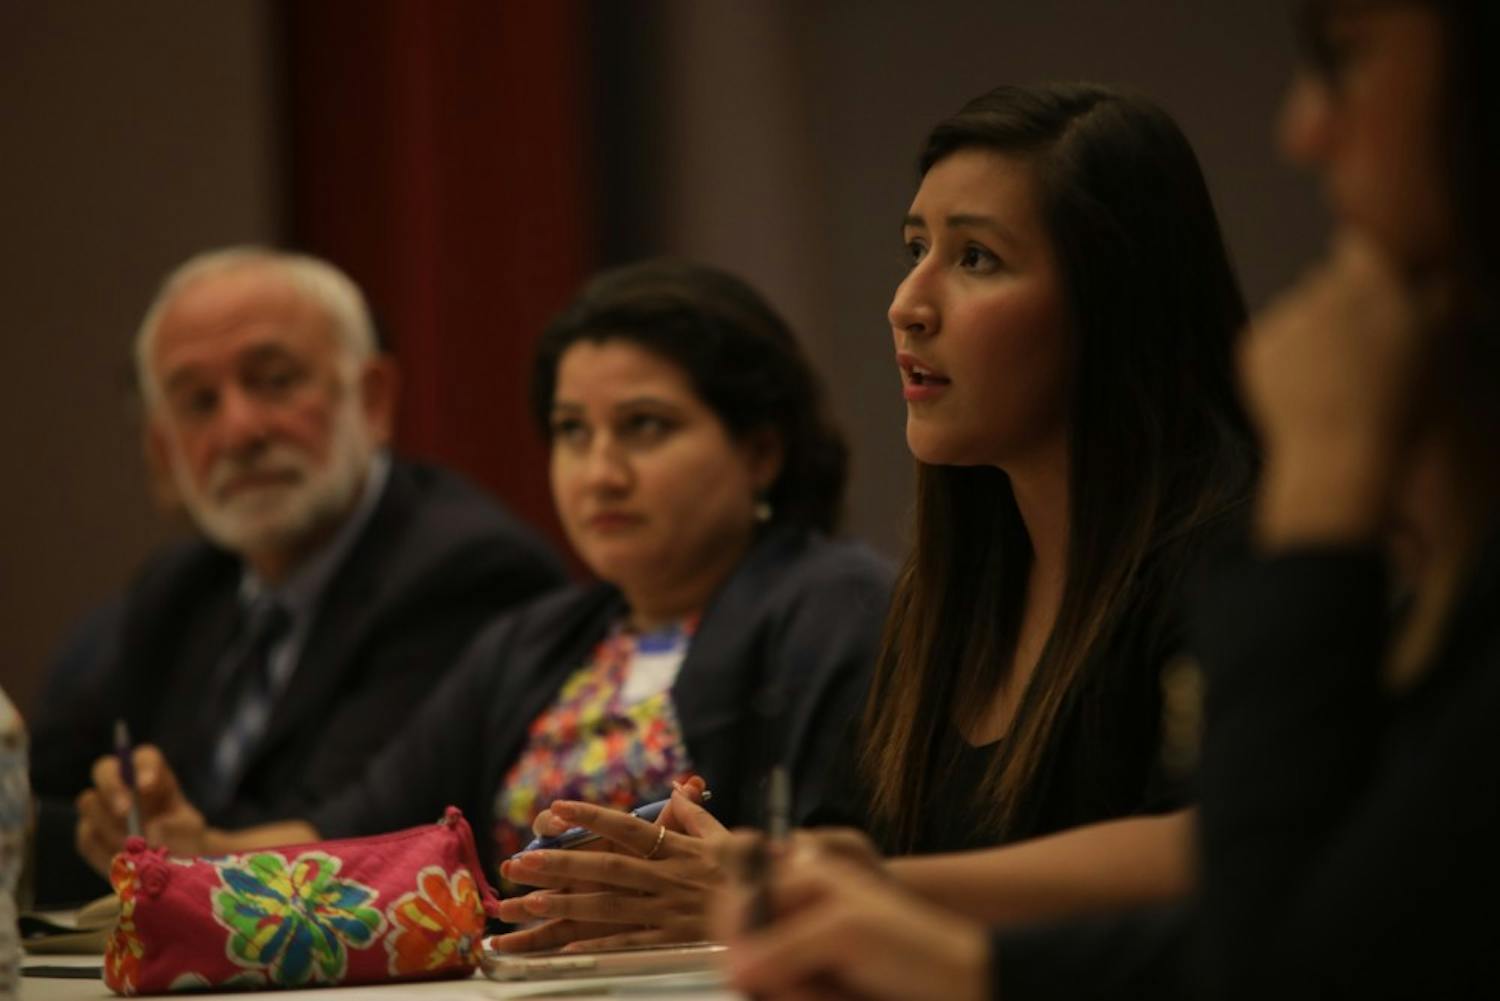 UNC senior Rubi Franco Quiroz speaks on Sept. 18 at the DACA in Crisis event, a panel discussion comprised of lawyers, activists and students about how to support the undocumented and DACAmented community.